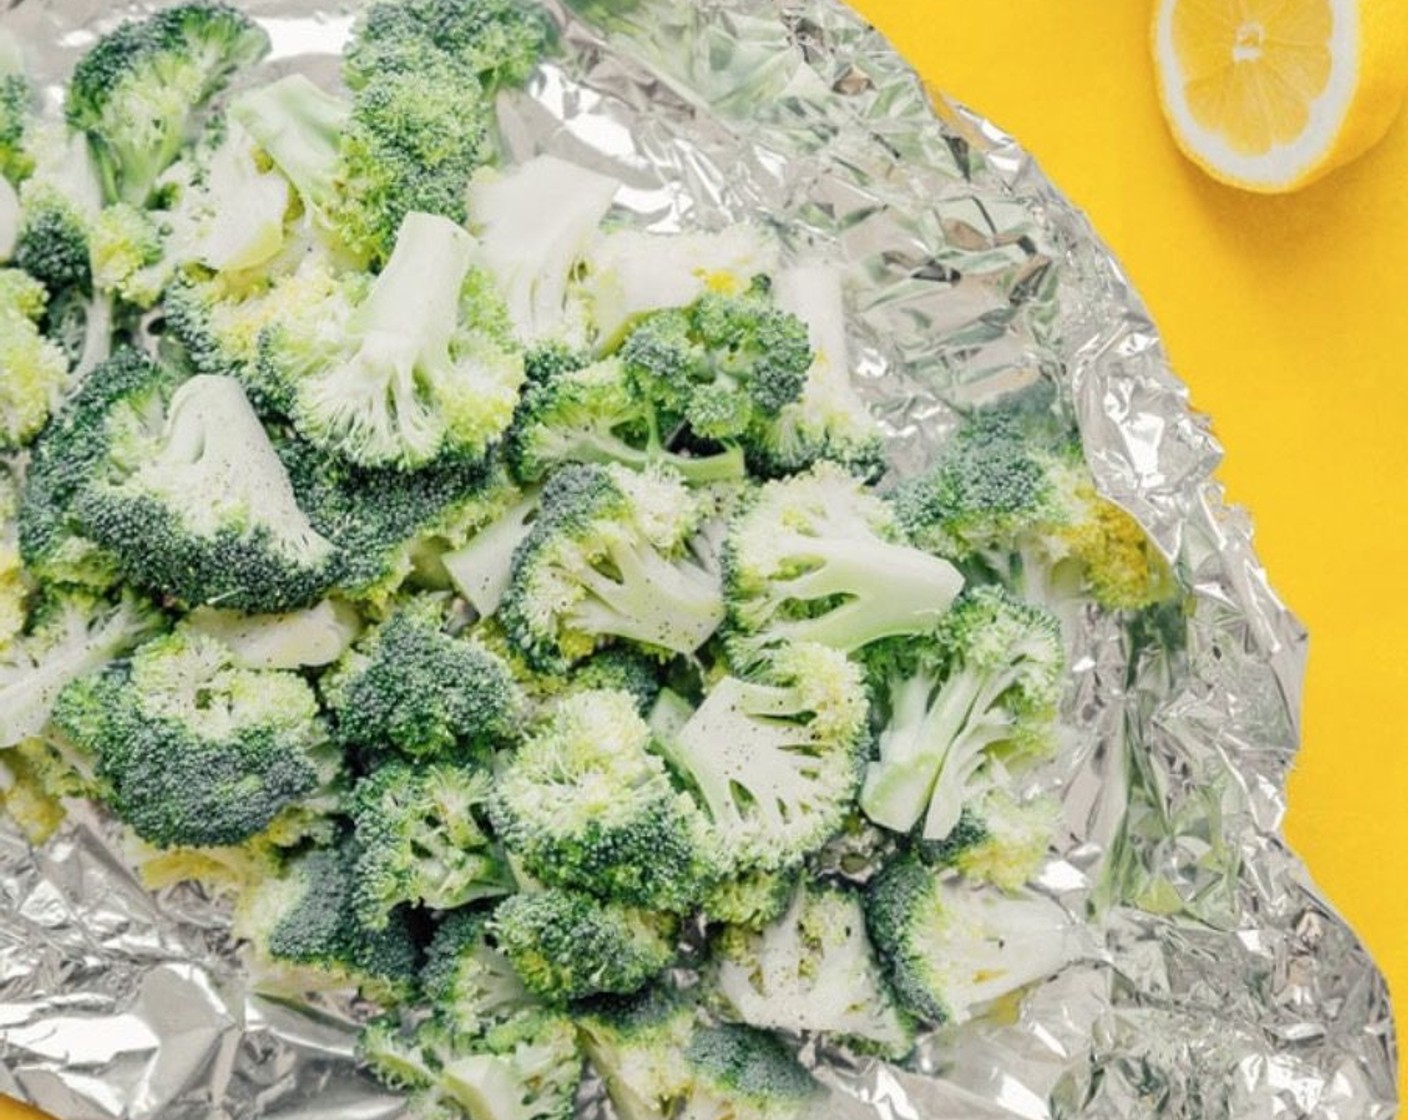 step 2 Chop Broccoli (1 head) into florets, then set on a large sheet of aluminum foil. Throw on the Garlic (4 cloves) and drizzle with Olive Oil (1 tsp). Cover with more foil and pinch together to form a sealed pouch.